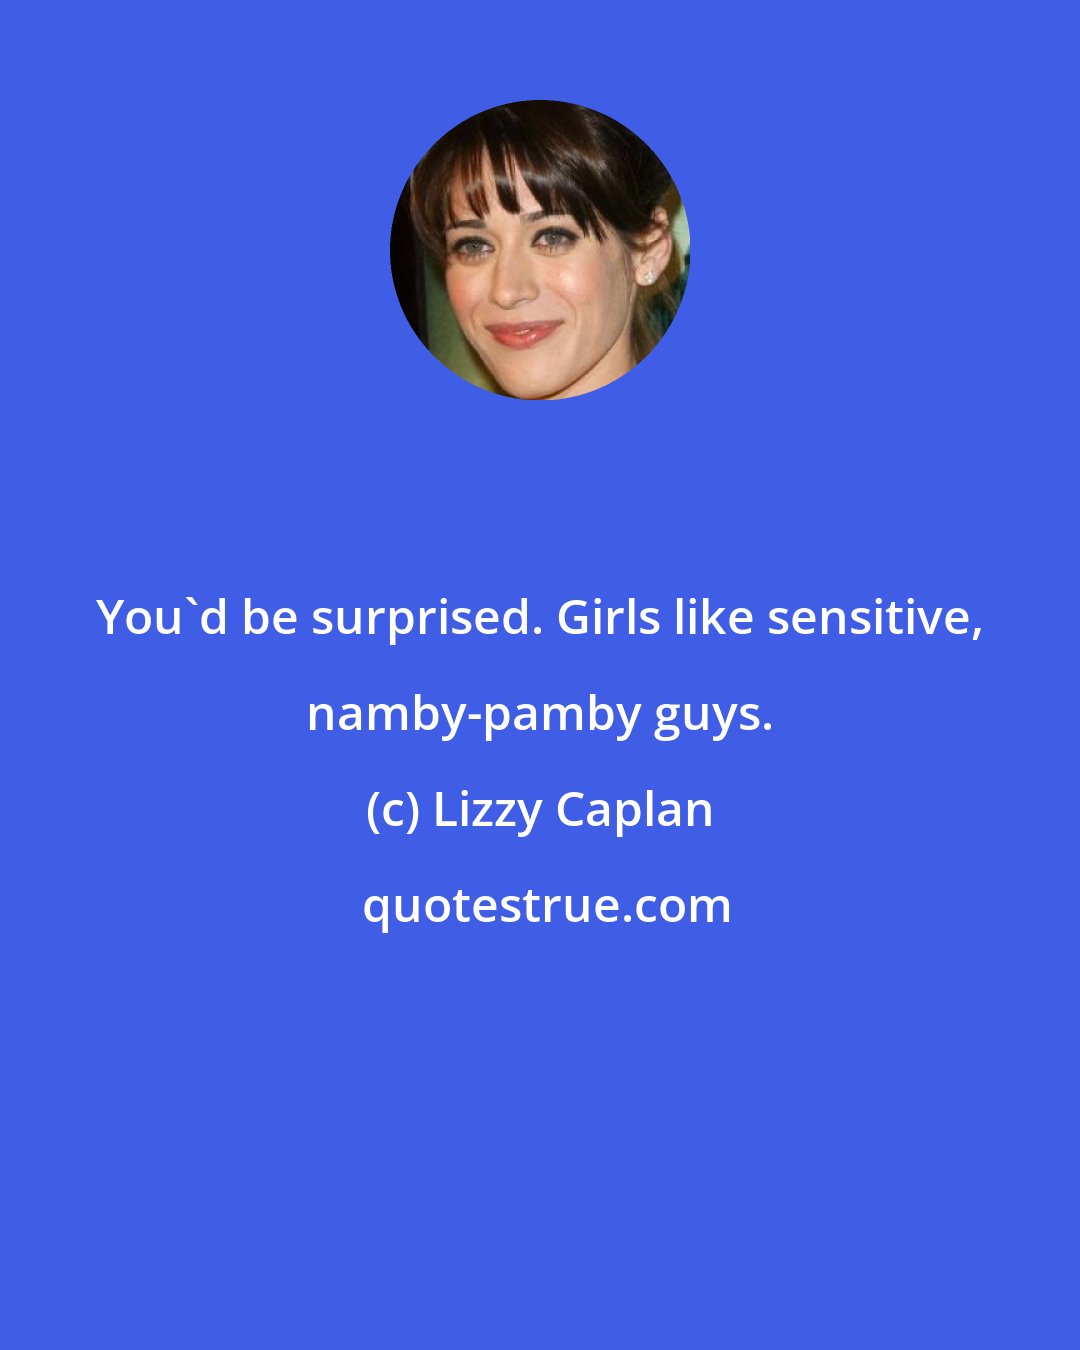 Lizzy Caplan: You'd be surprised. Girls like sensitive, namby-pamby guys.